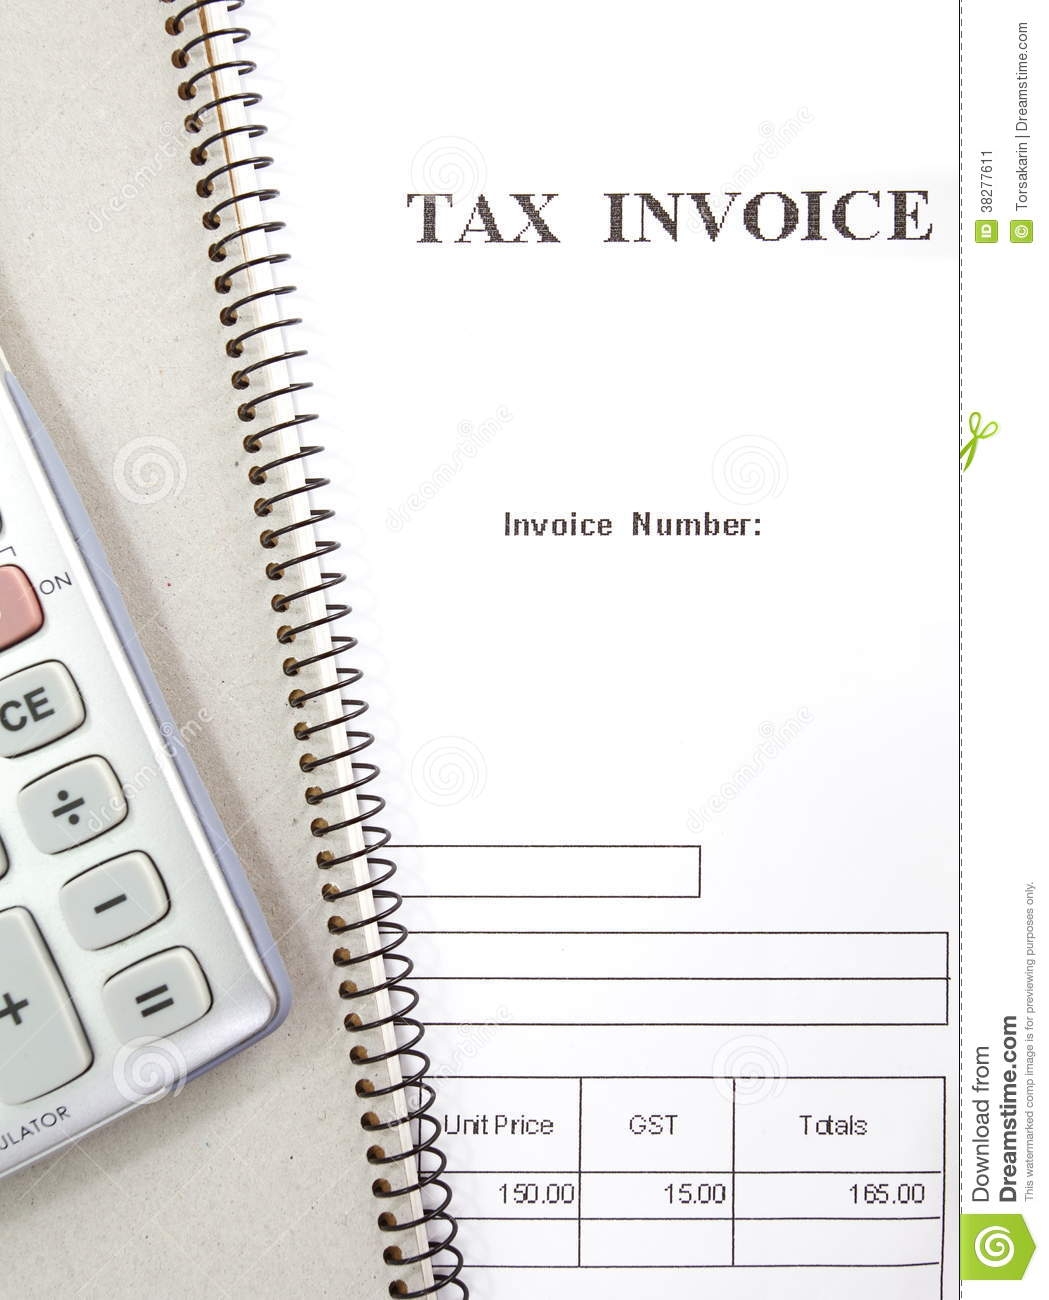 tax invoice form stock image image of accounting copy royalty gst tax invoice